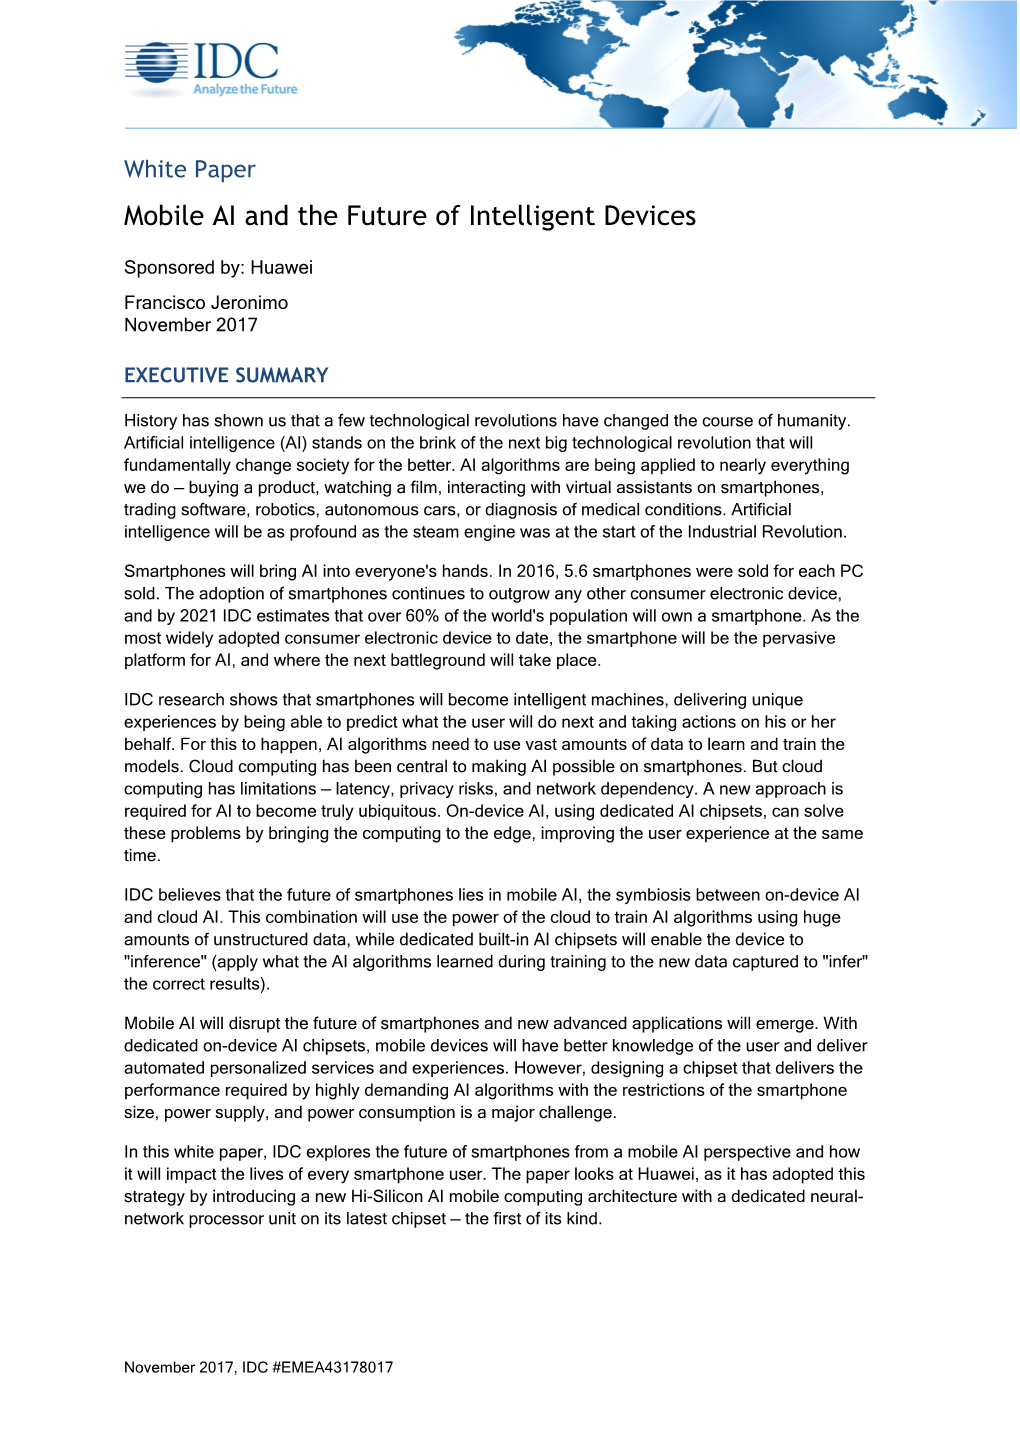 White Paper Mobile AI and the Future of Intelligent Devices